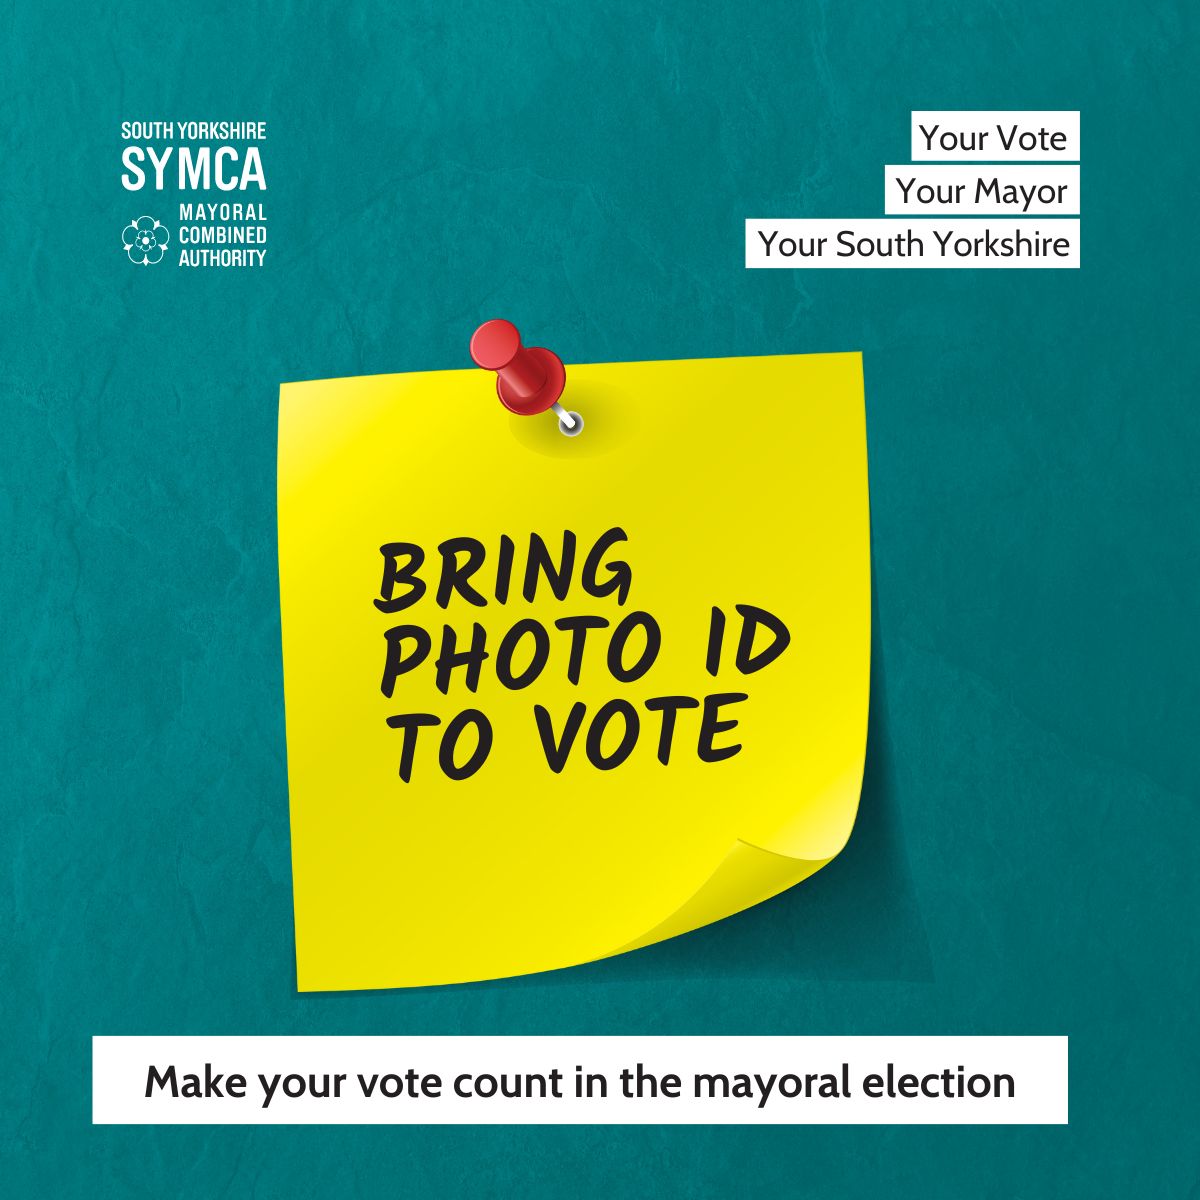 To vote in the South Yorkshire mayoral election you must have either valid ID or a Voter Authority Certificate (VAC). A VAC is free to apply for if you don’t have one of the approved forms of ID. Apply by 5pm on 24th April to get a VAC: orlo.uk/i7Awu #syelects